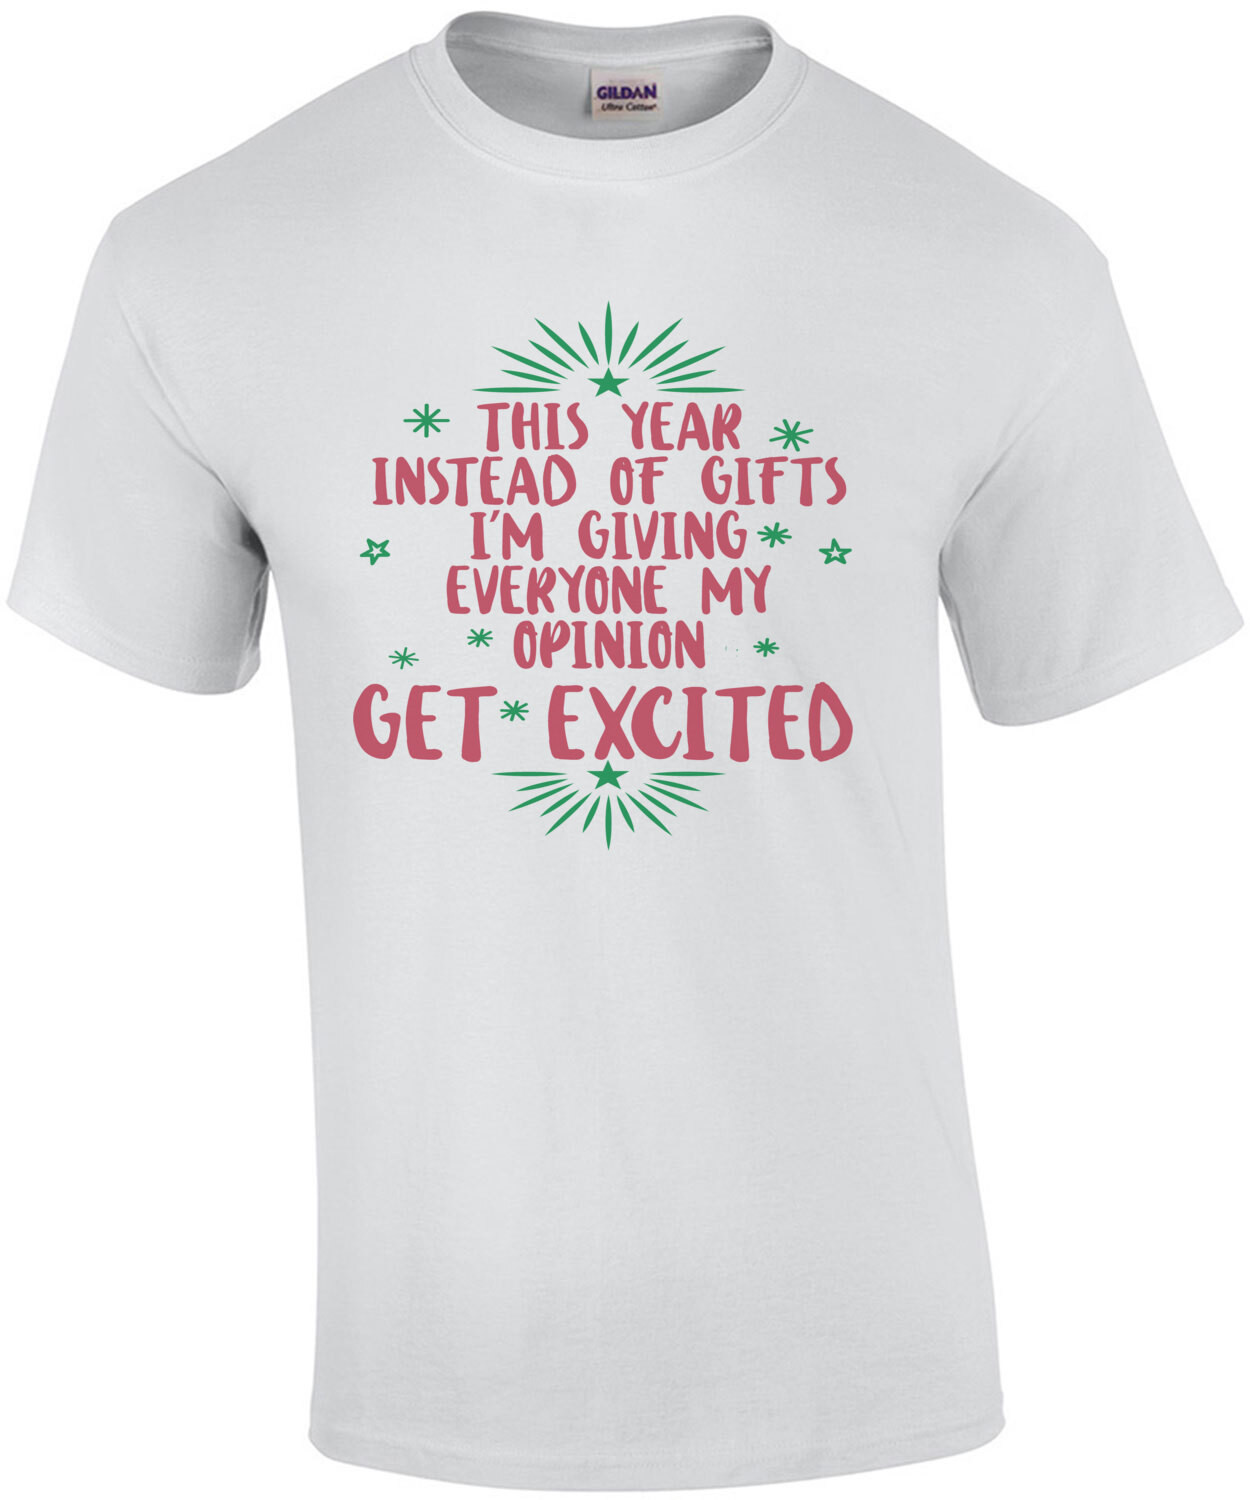 This year instead of gifts - I'm giving everyone my opinion. Get excited - funny sarcastic Christmas T-Shirt